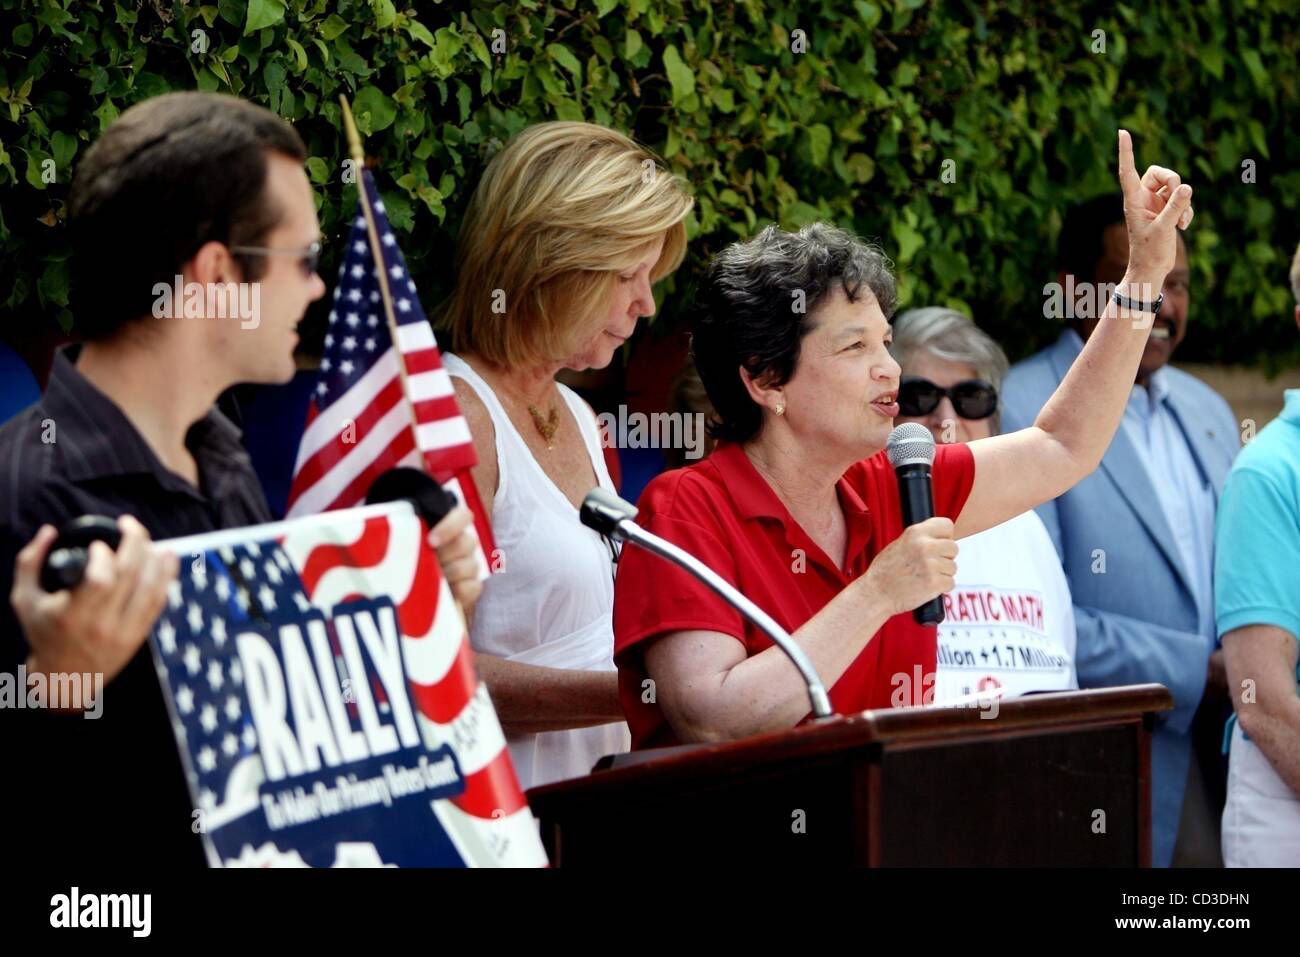 Apr 26, 2008 - Riviera Beach, Florida, USA - Mayor LOIS FRANKEL, center, of West Palm Beach, along with other supporters of a petition to the Democratic National Committee to count Florida votes from the primary held in January at a Florida Demands Representation rally at the public library in West  Stock Photo